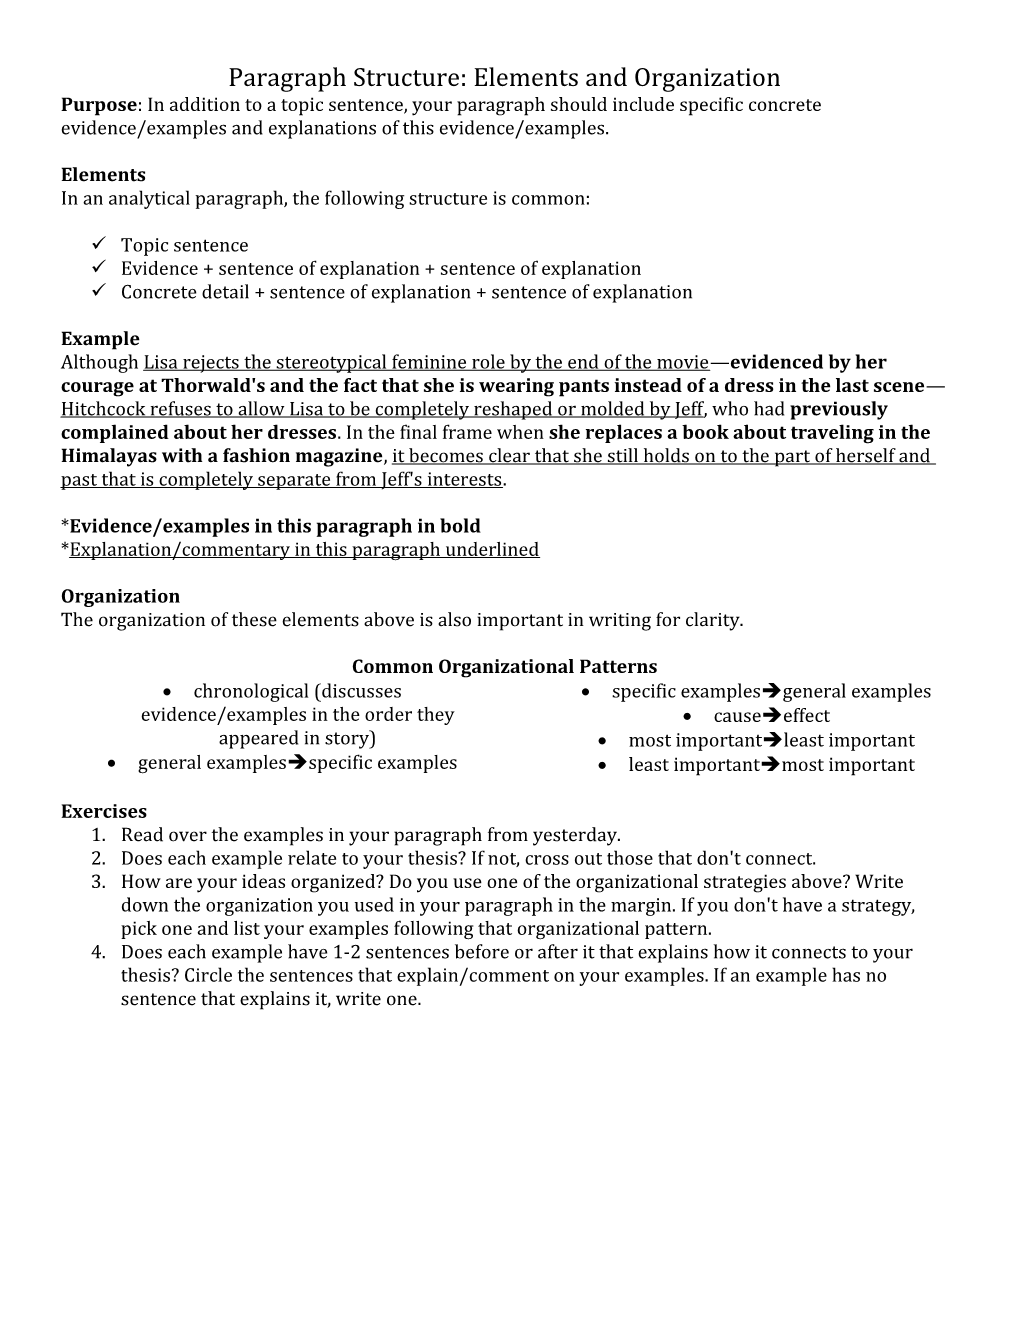 Paragraph Structure: Elements and Organization